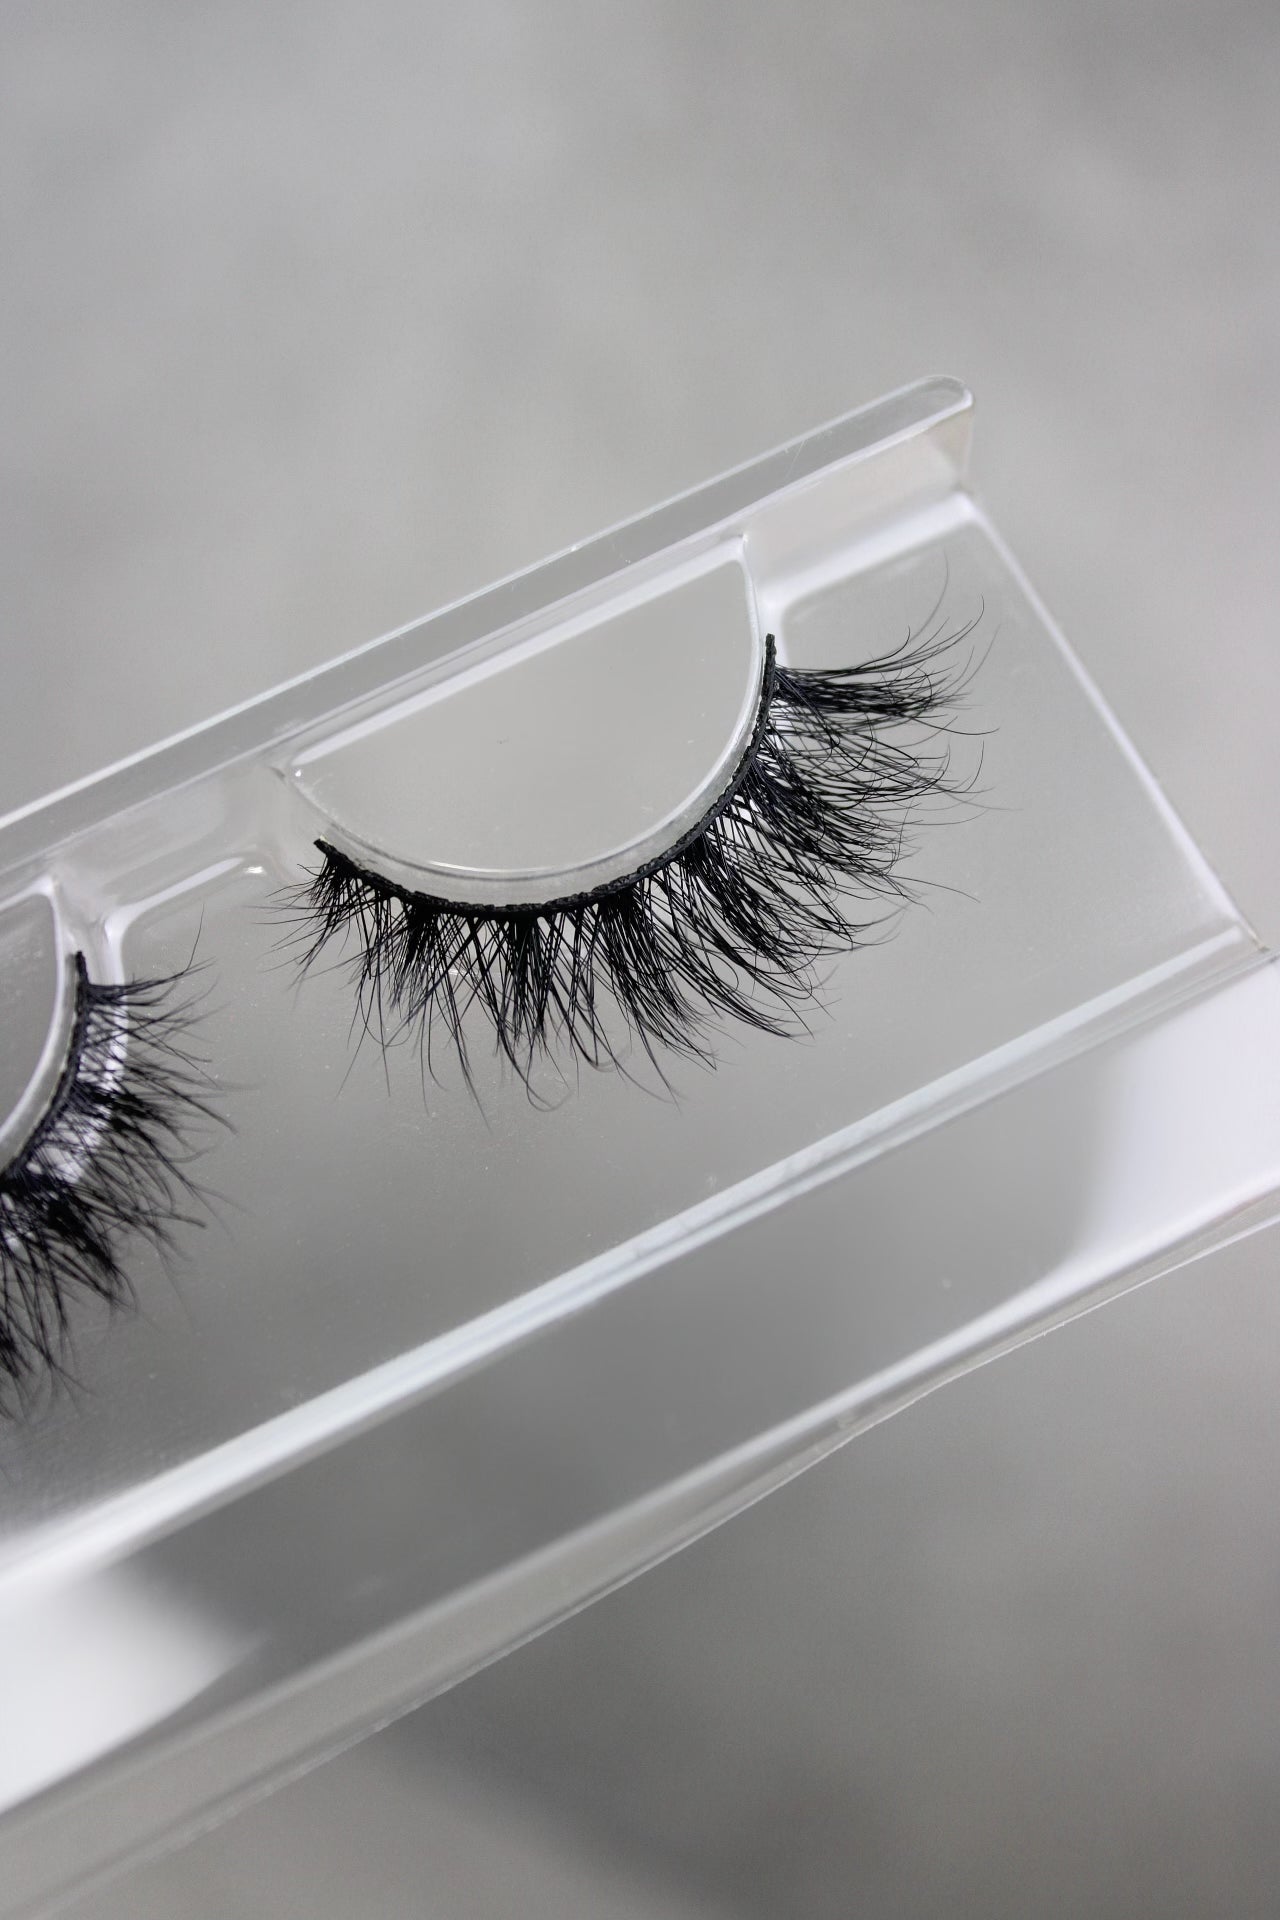 Passion Sultry Lash Bar 